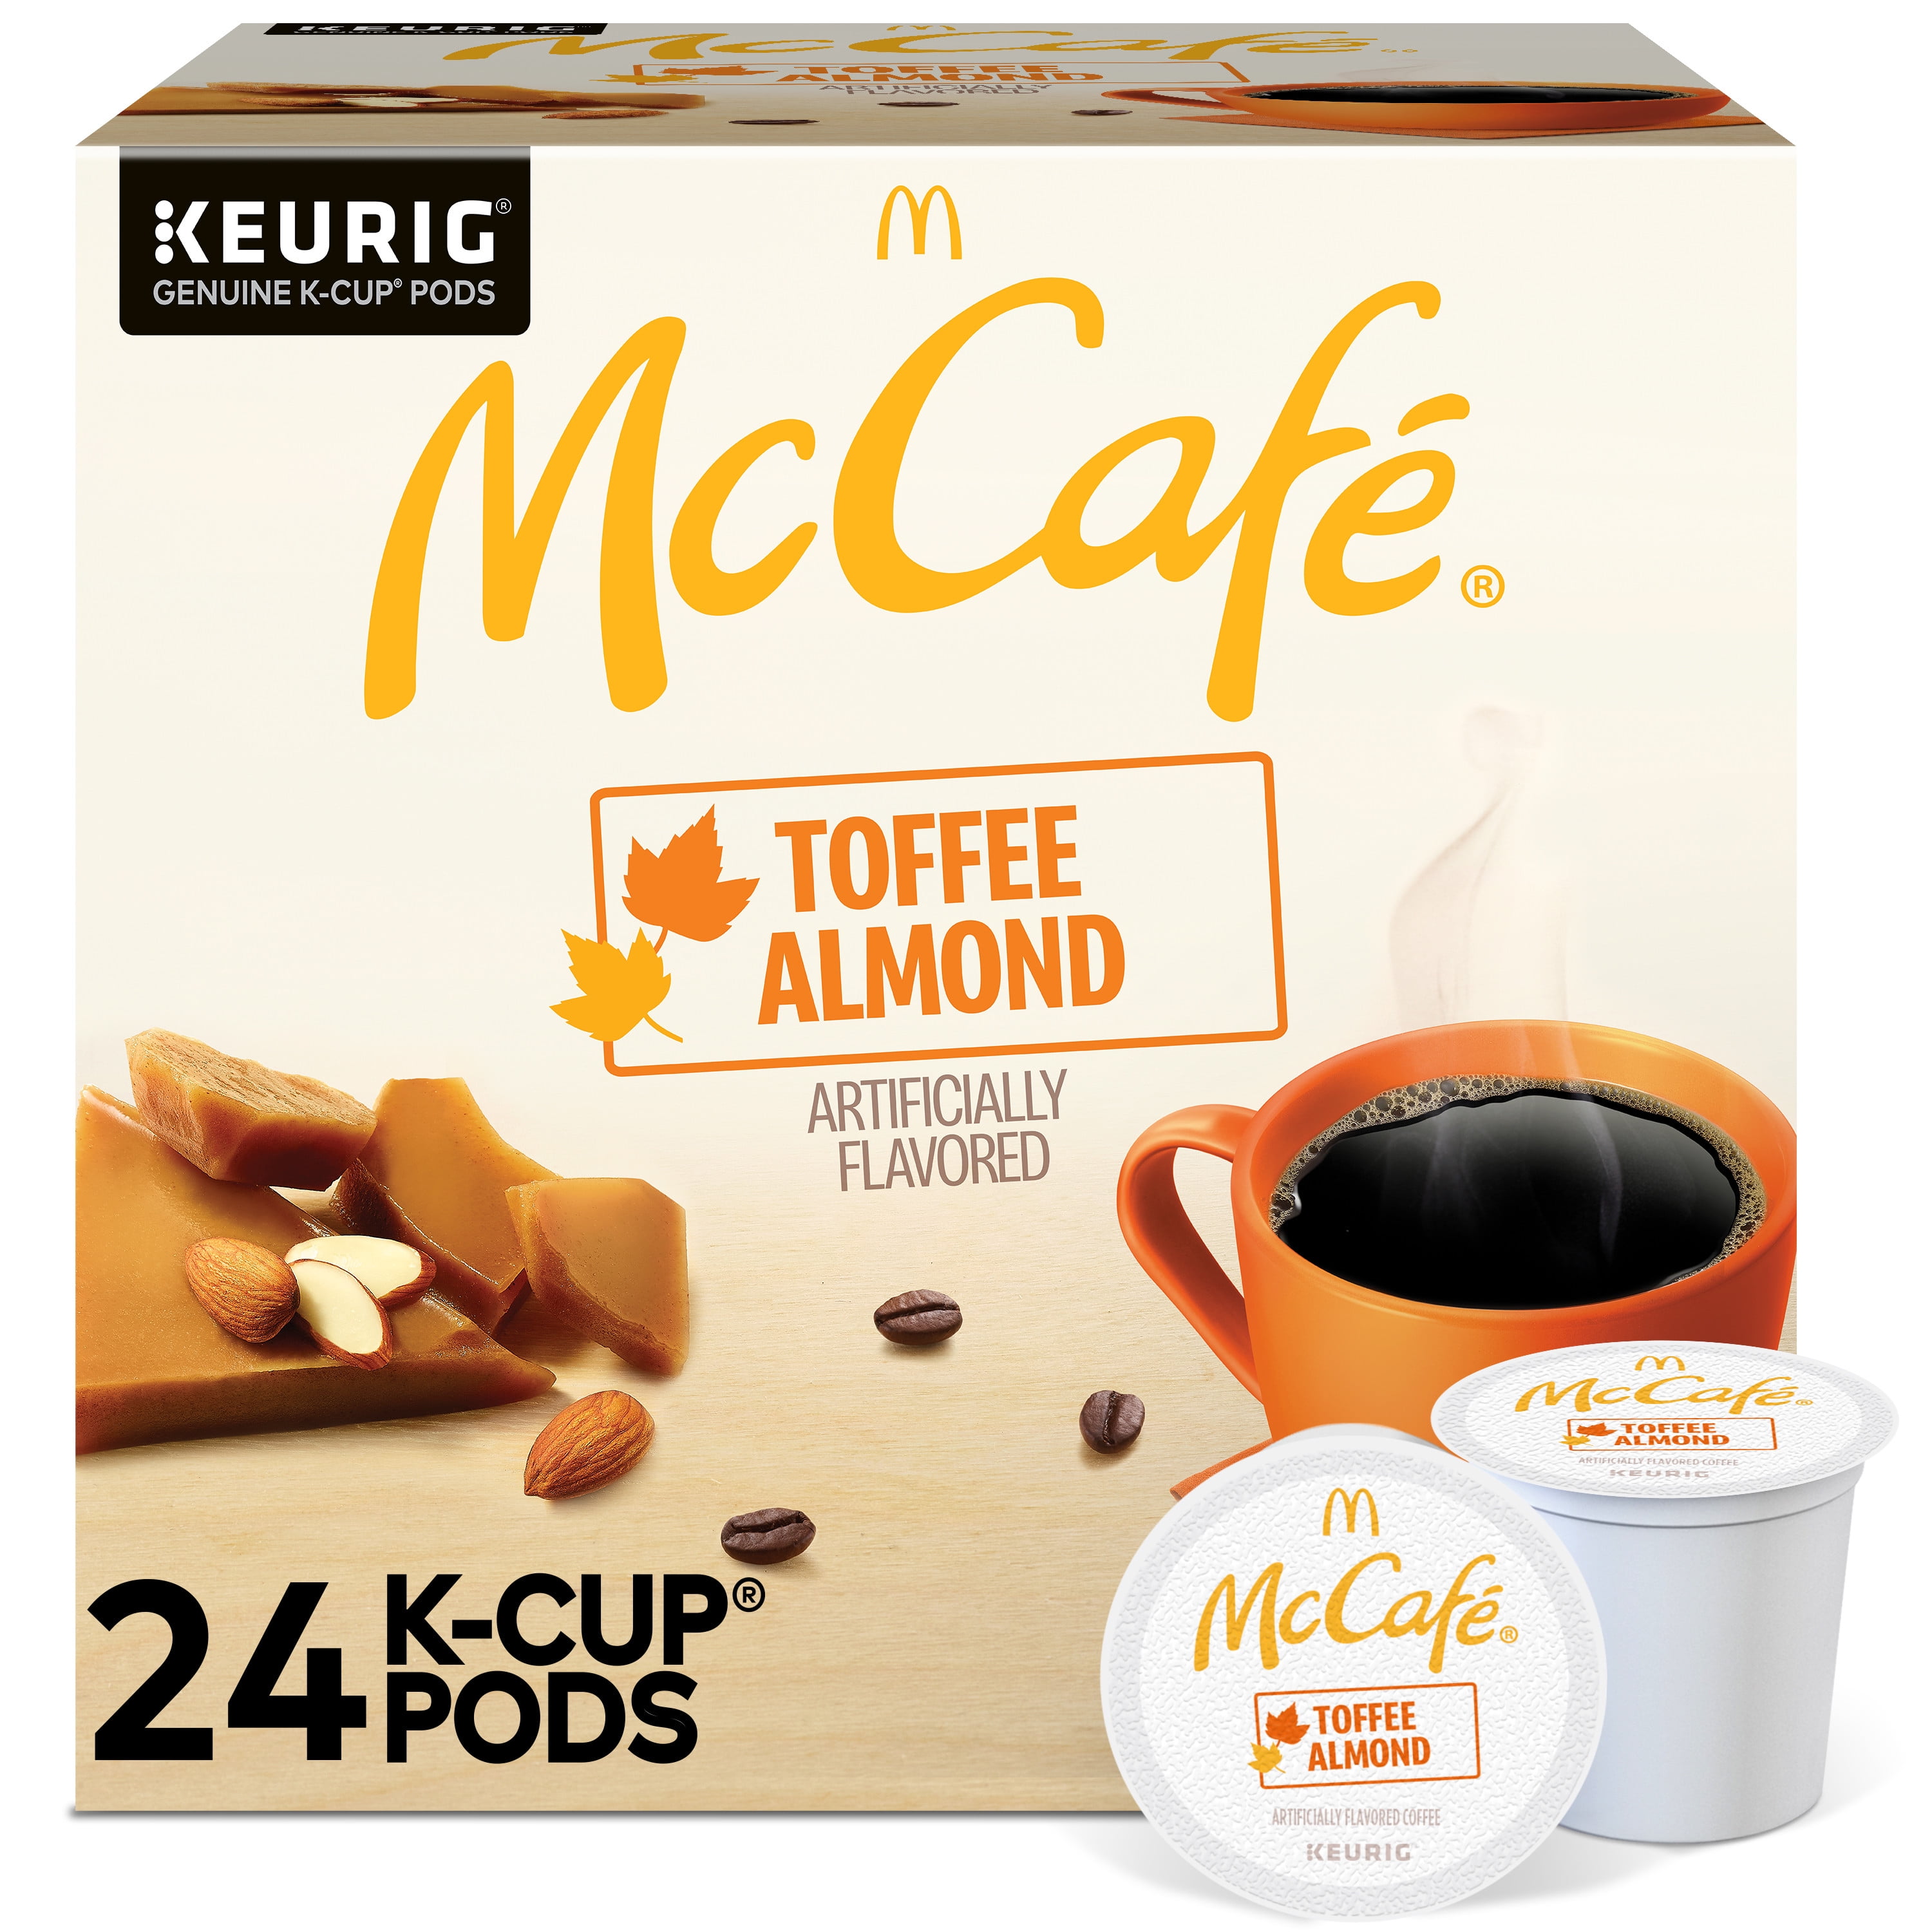 McCafe Toffee Almond Coffee, Keurig Single Serve K-Cup Pods, 24 Count